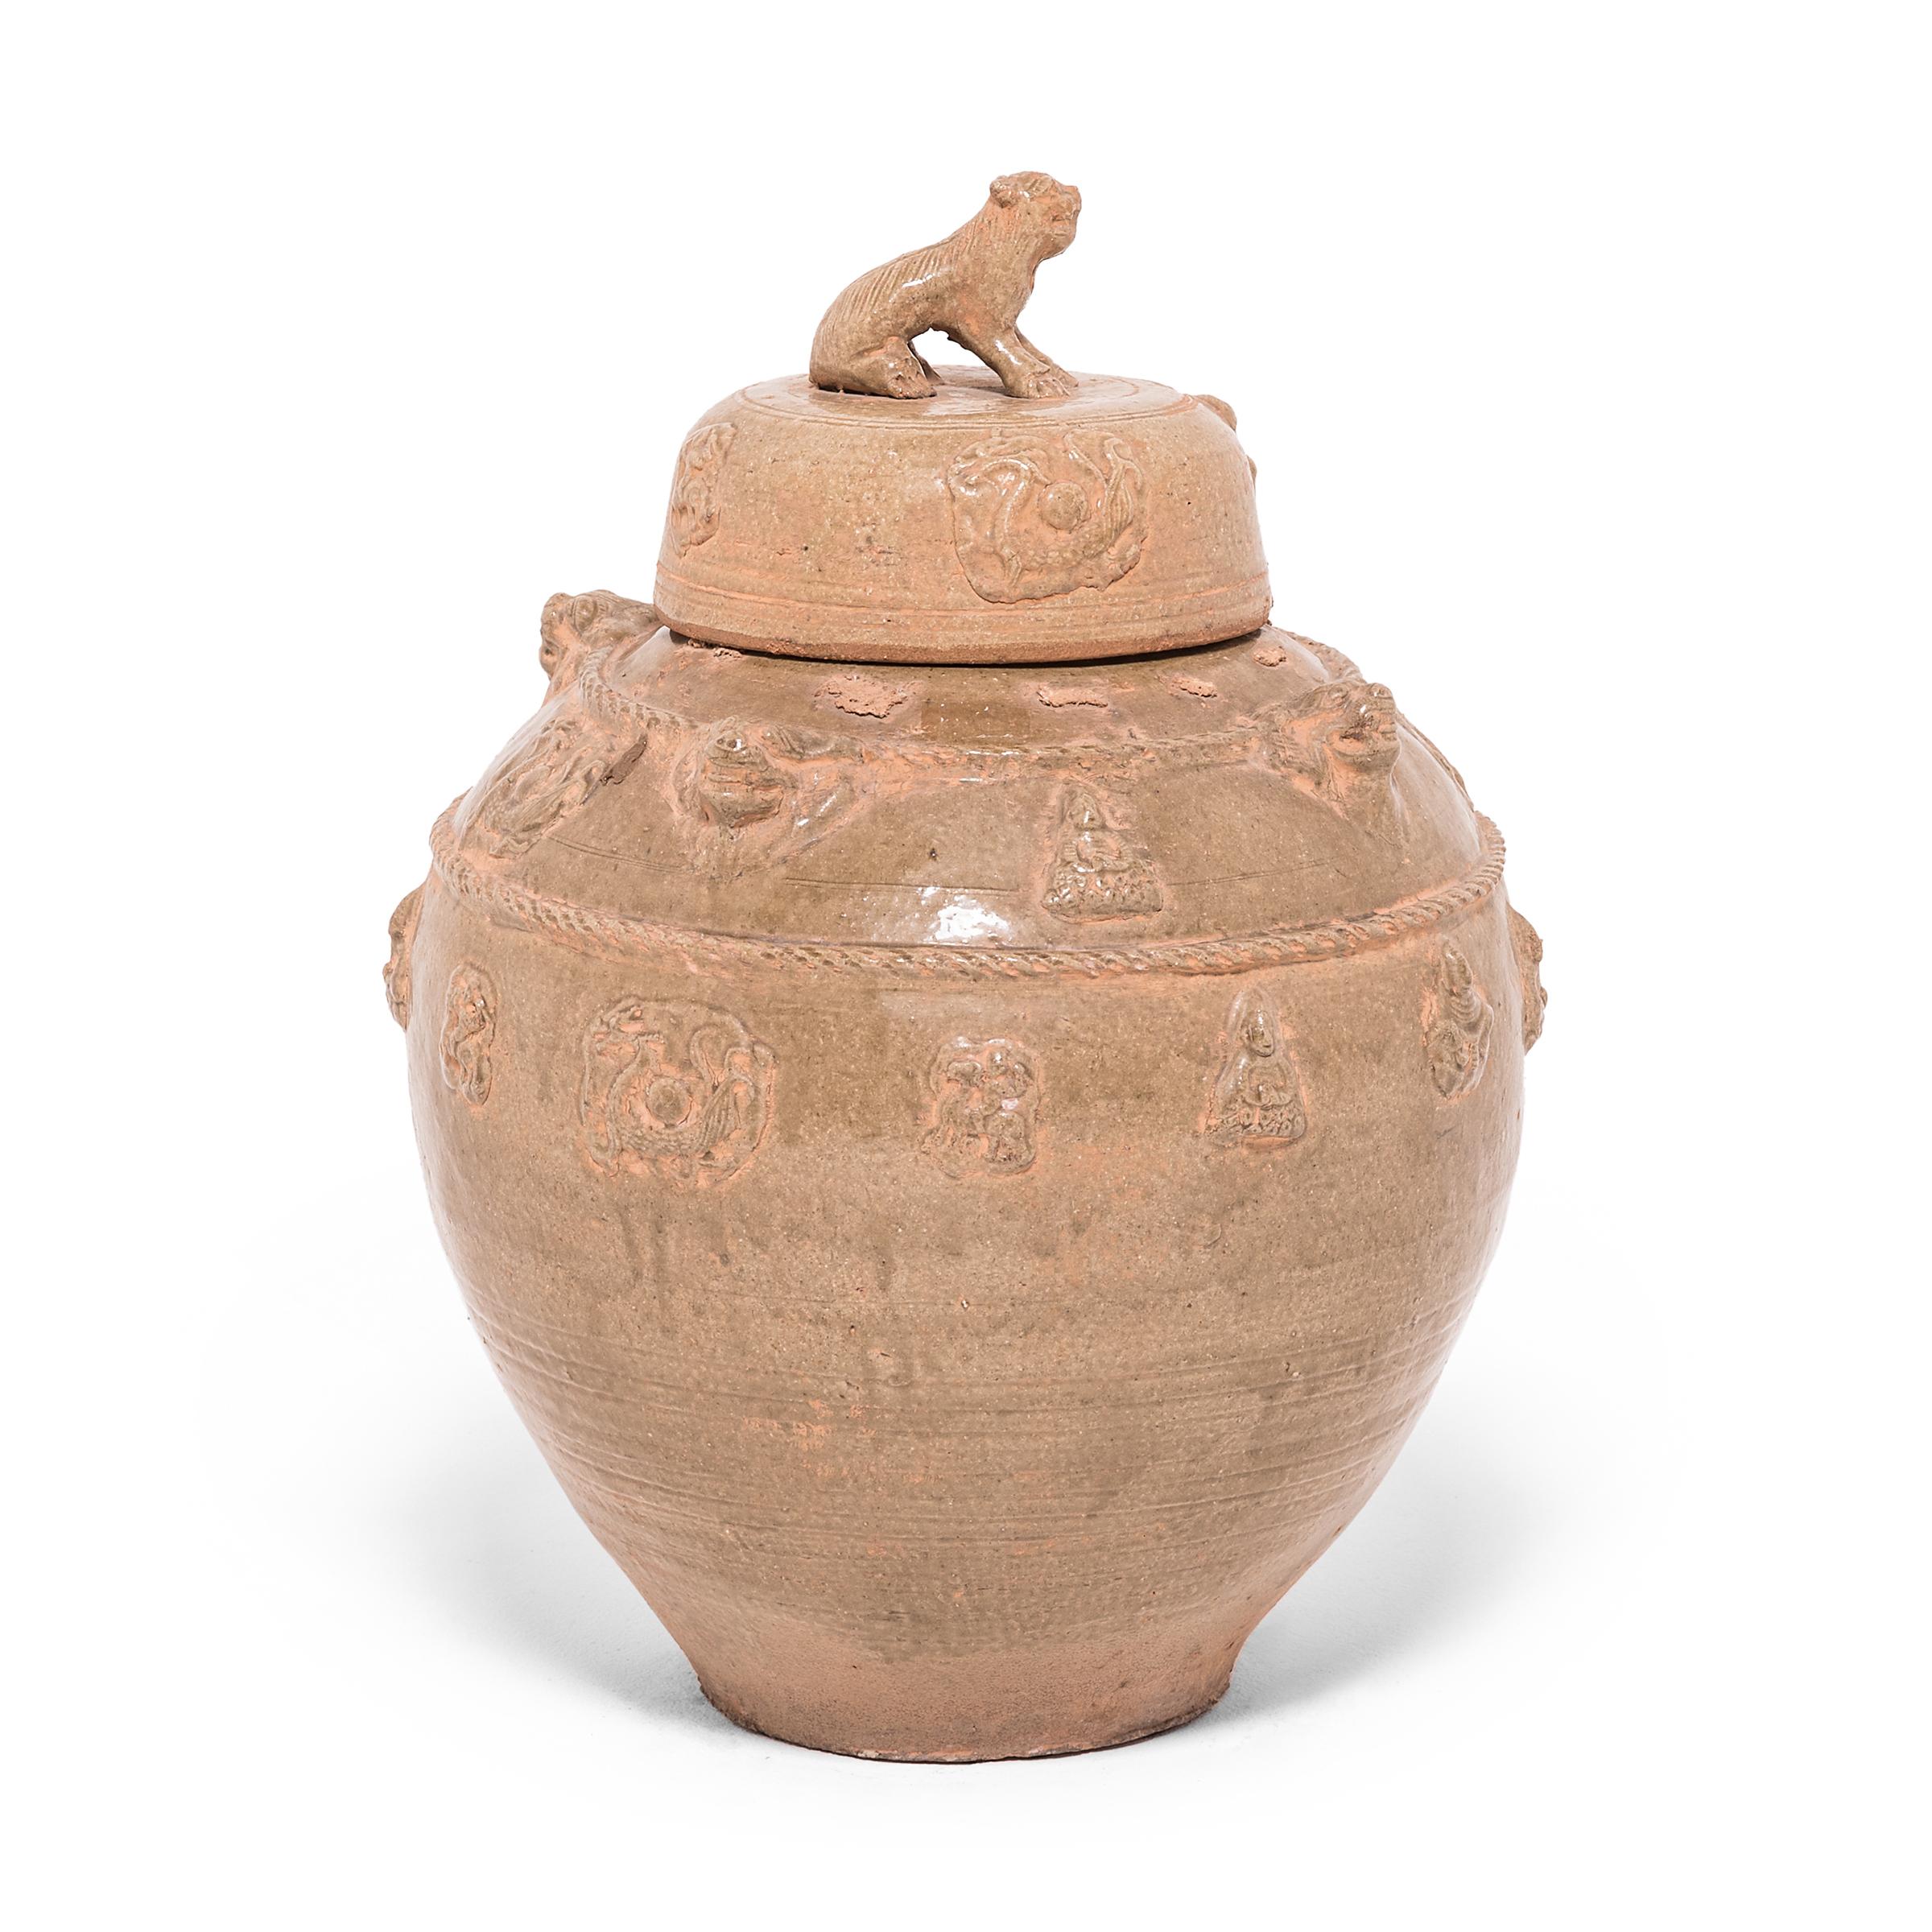 This ceramic vessel was handcrafted in the Jiangxi region of China in the spirit of ancient temple jars. The style and glaze is reminiscent of Han dynasty burial vessels designed to store wine for passage to the afterlife. The jar is decorated in